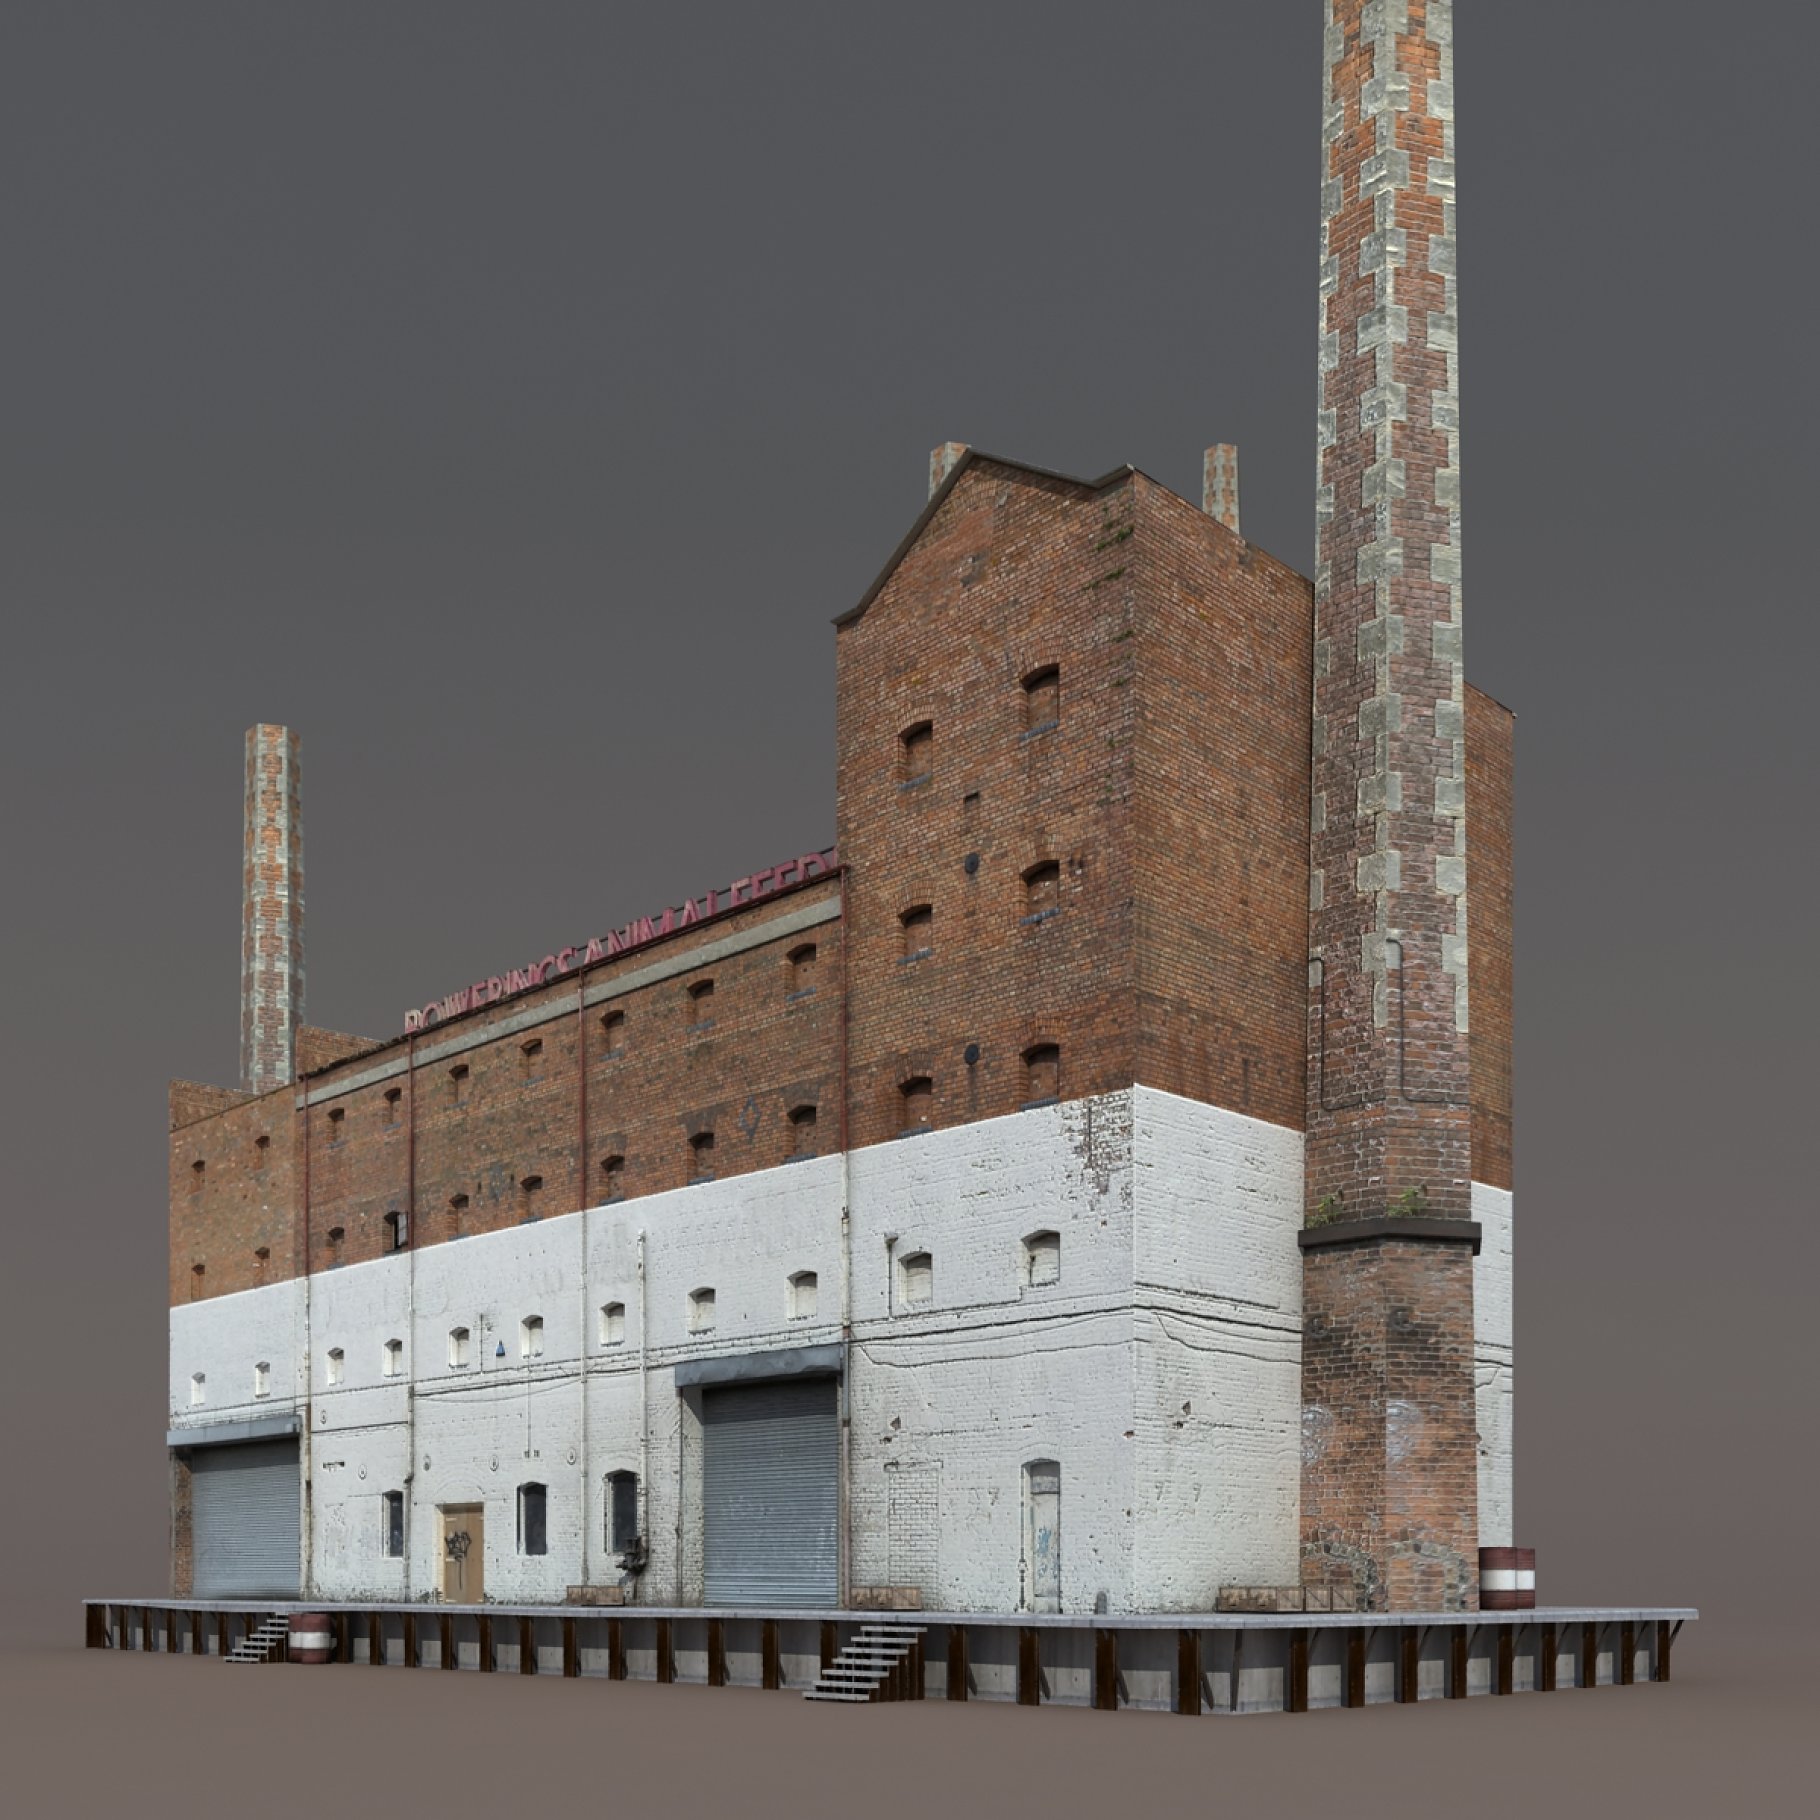 Mockup of abandoned old factory from below.